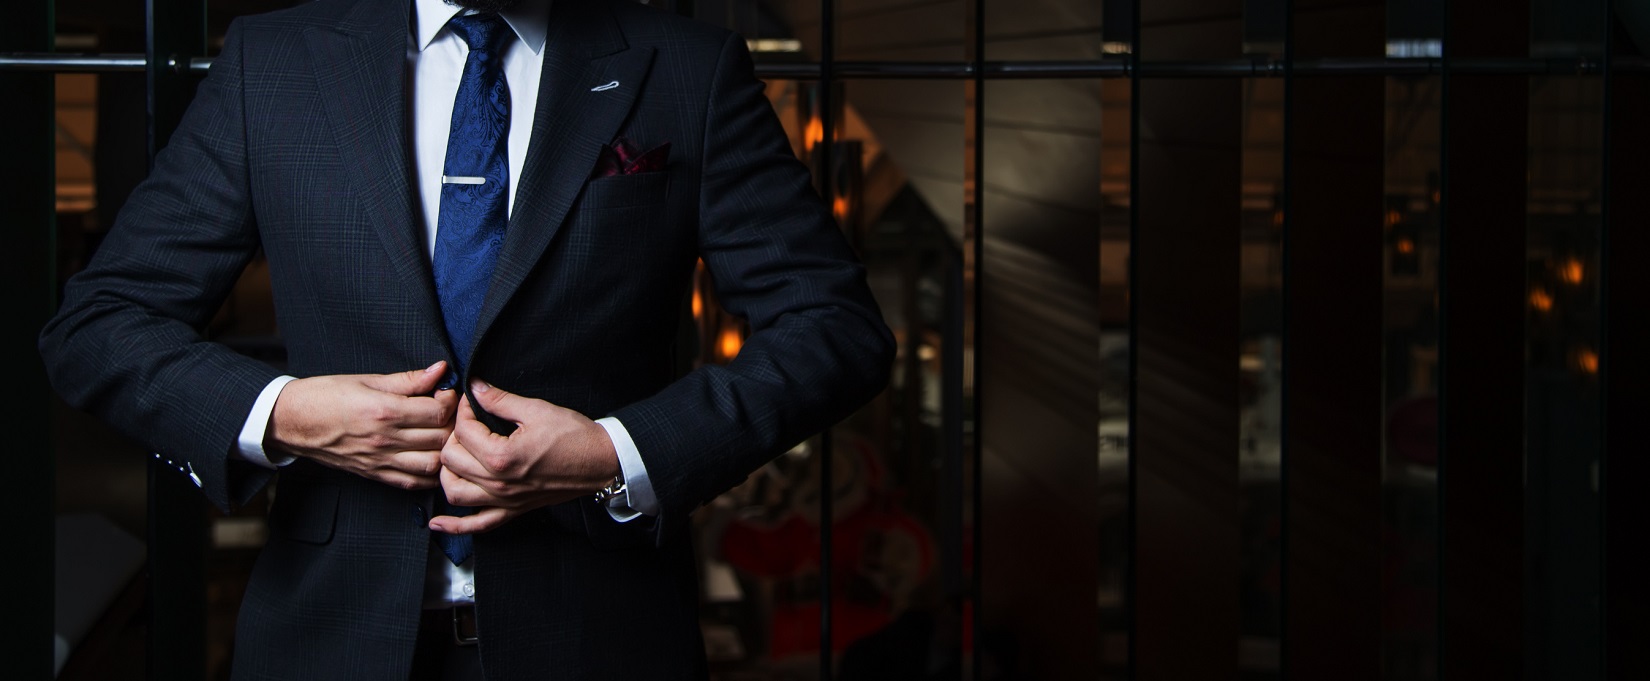 BESPOKE SUITS: WHAT TO CONSIDER WHEN HAVING A SUIT TAILOR MADE